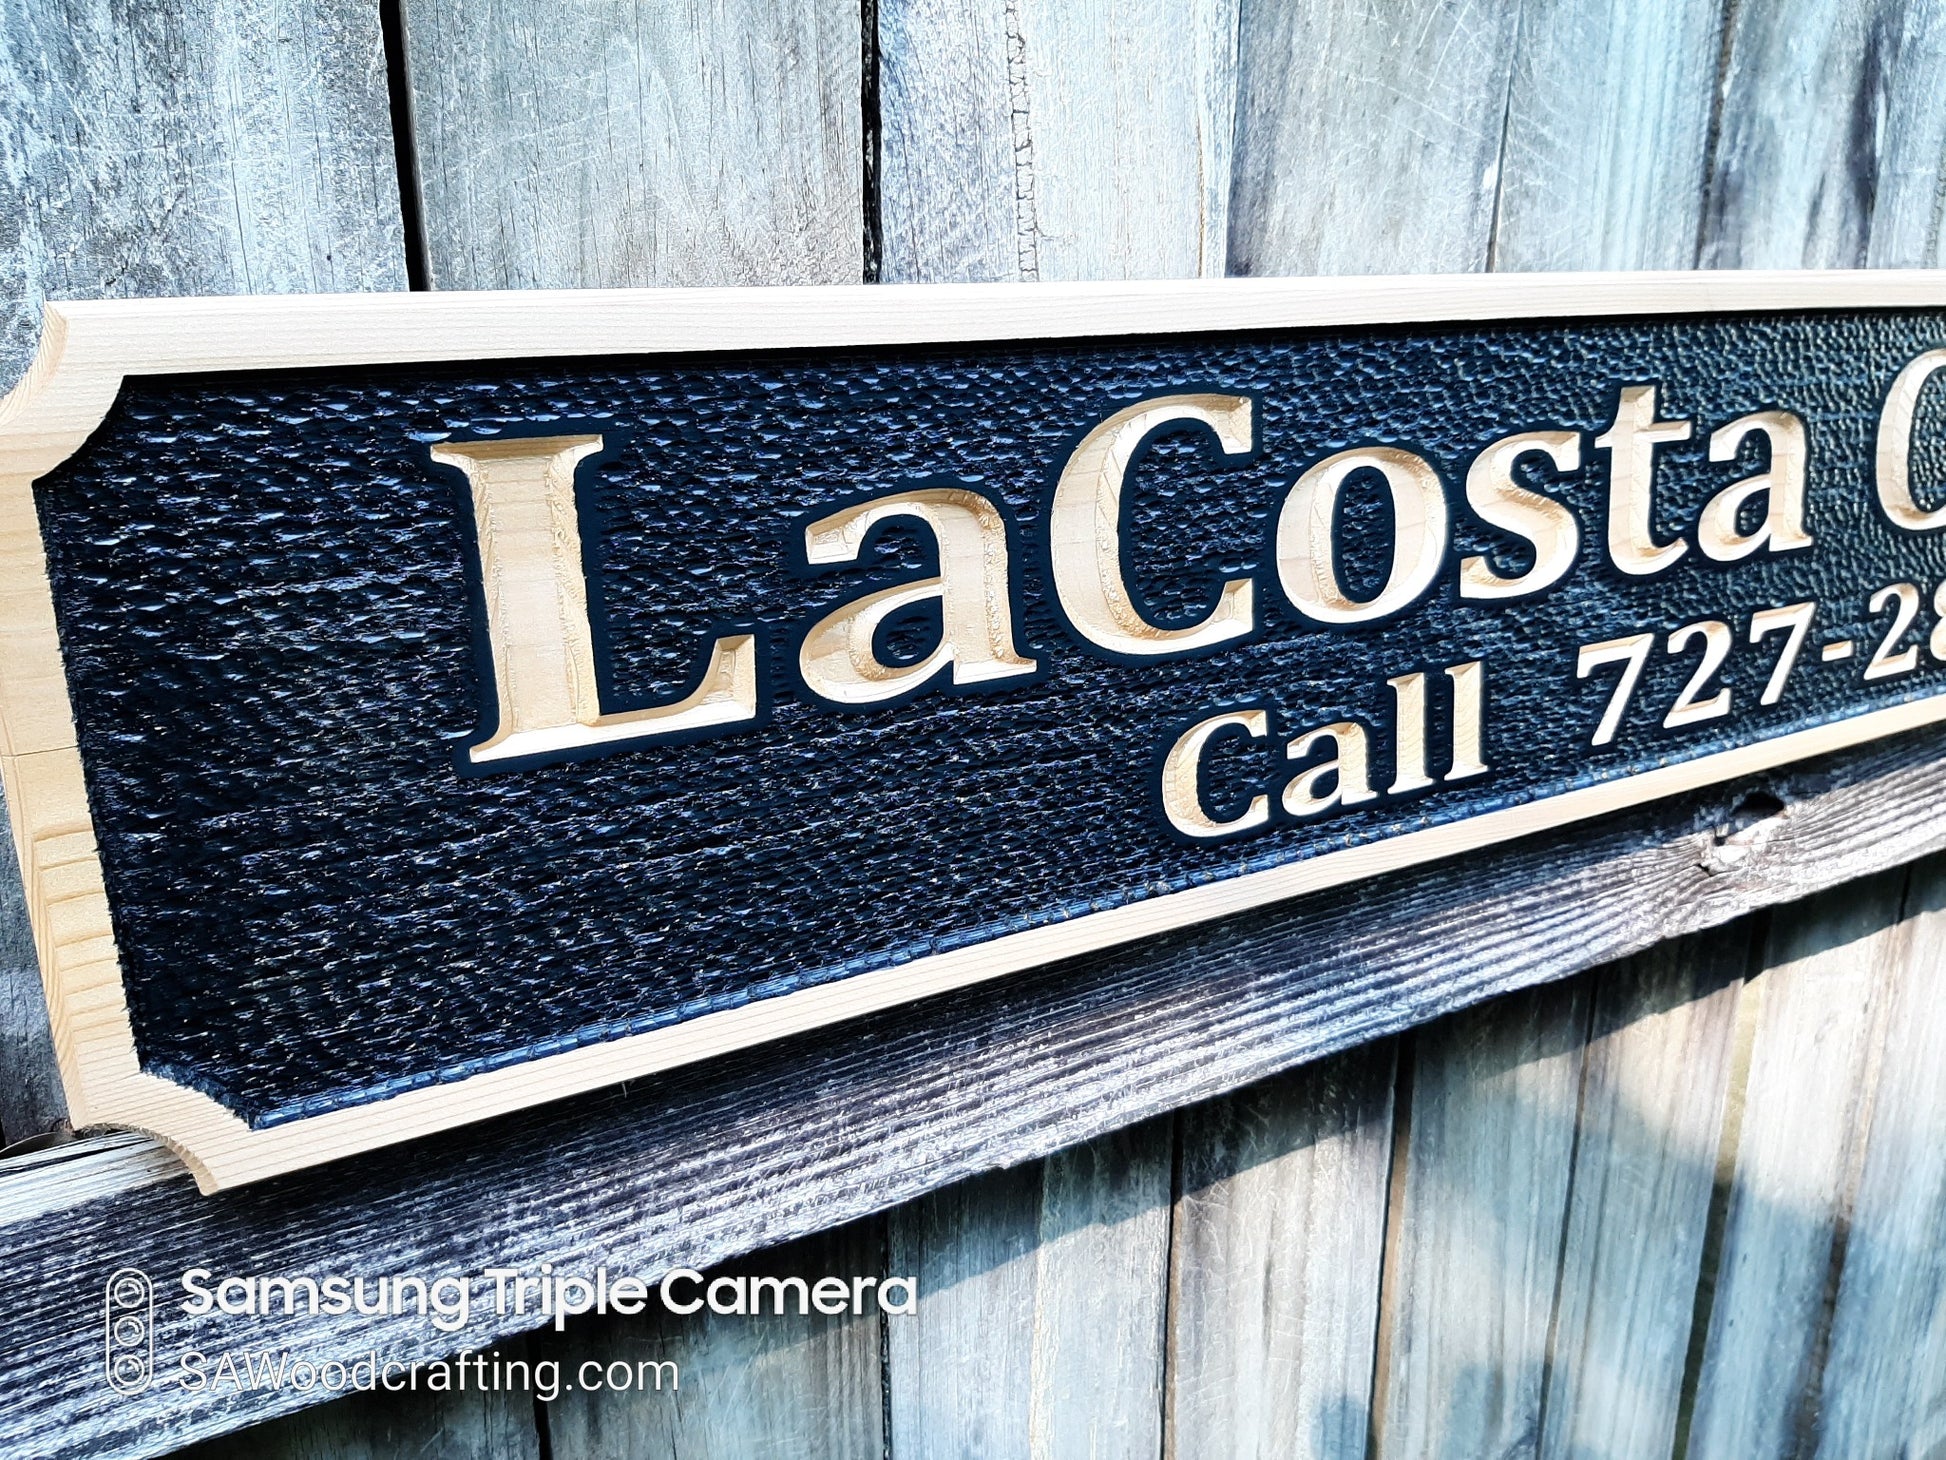 Custom wood carved Boat Rental Dock sign, Yacht dock signs made in the USA.